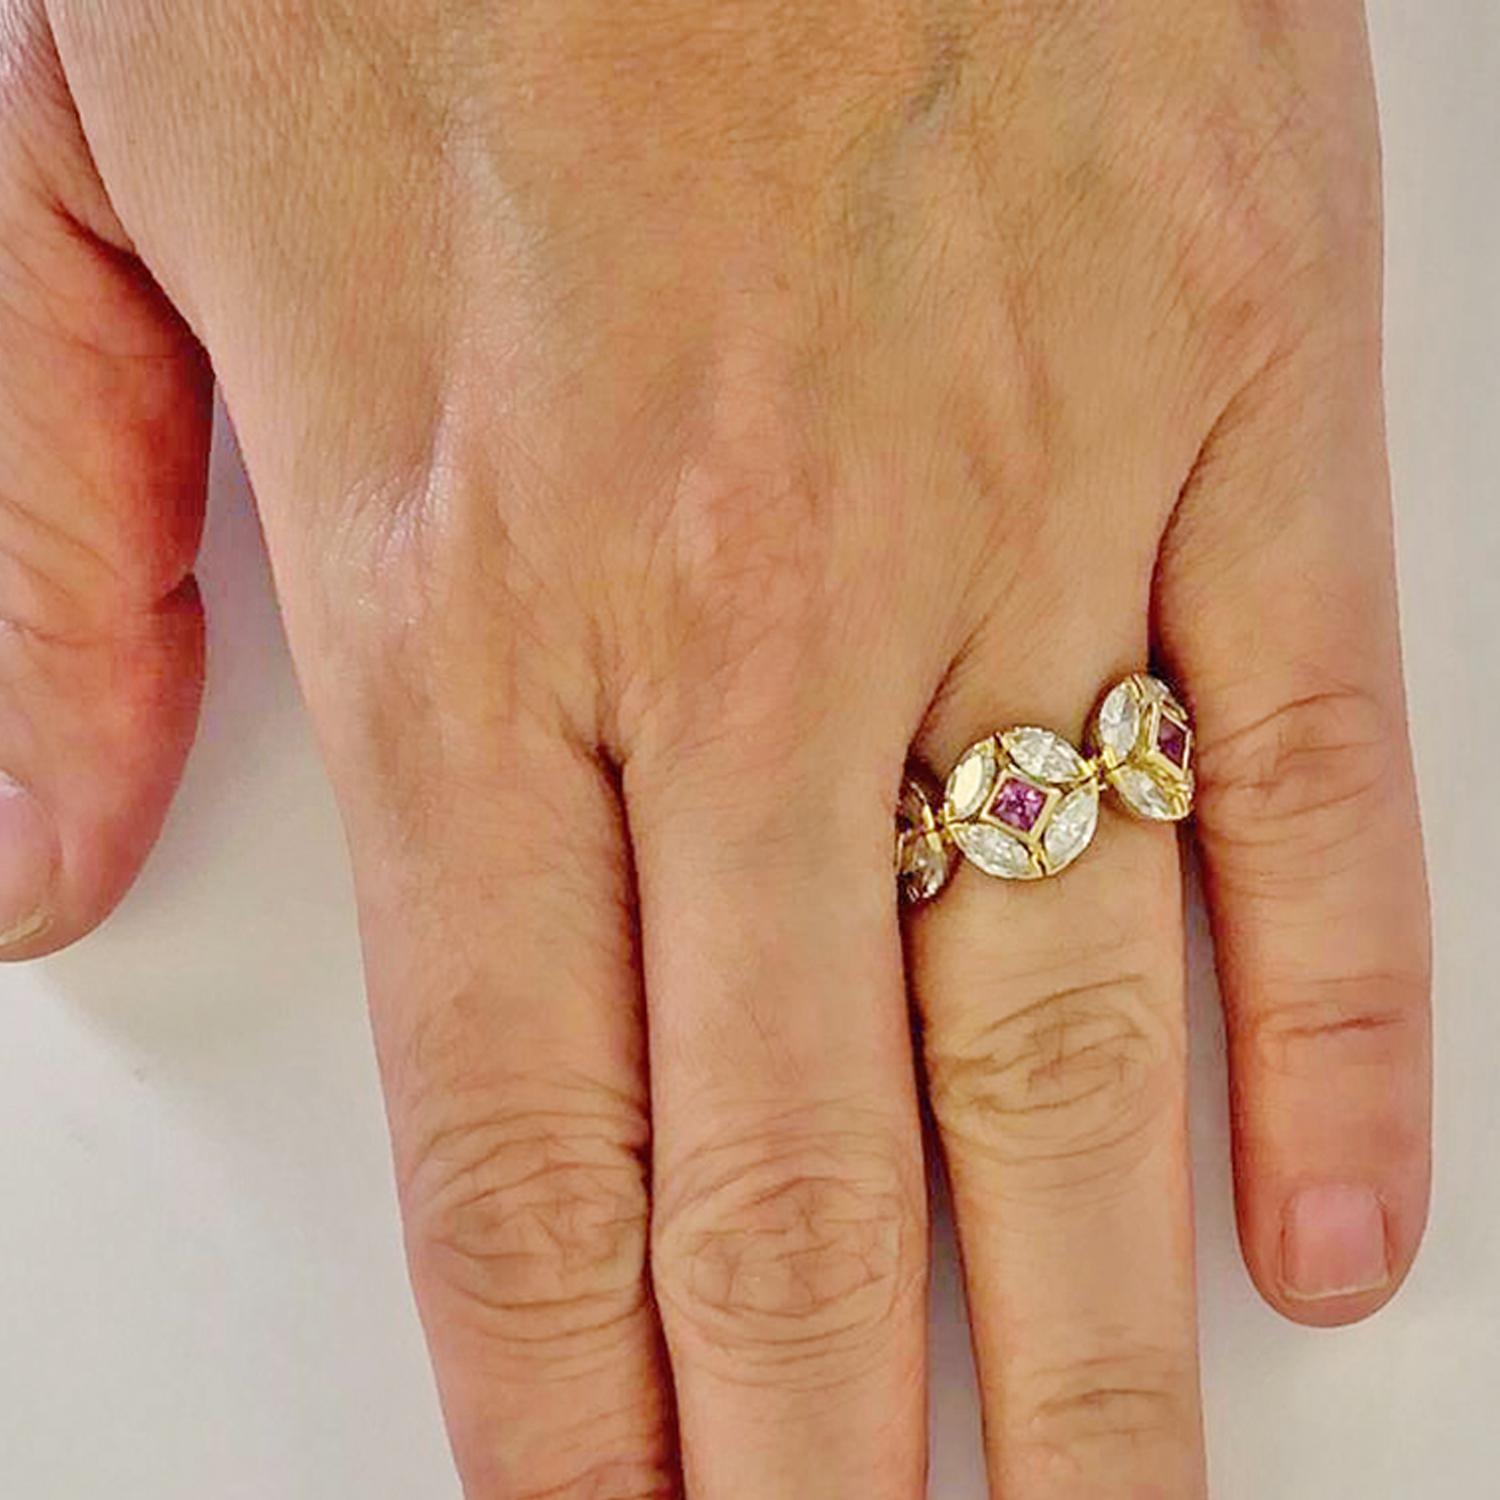 HAUME Diamond Pink Sapphire Eternity Band Ring in 18k Yellow Gold.
A unique eternity band by Adria de Haume, with round florets repeated throughout. Each motif is comprised of four marquise-shaped diamond petals with a princess-cut pink sapphire